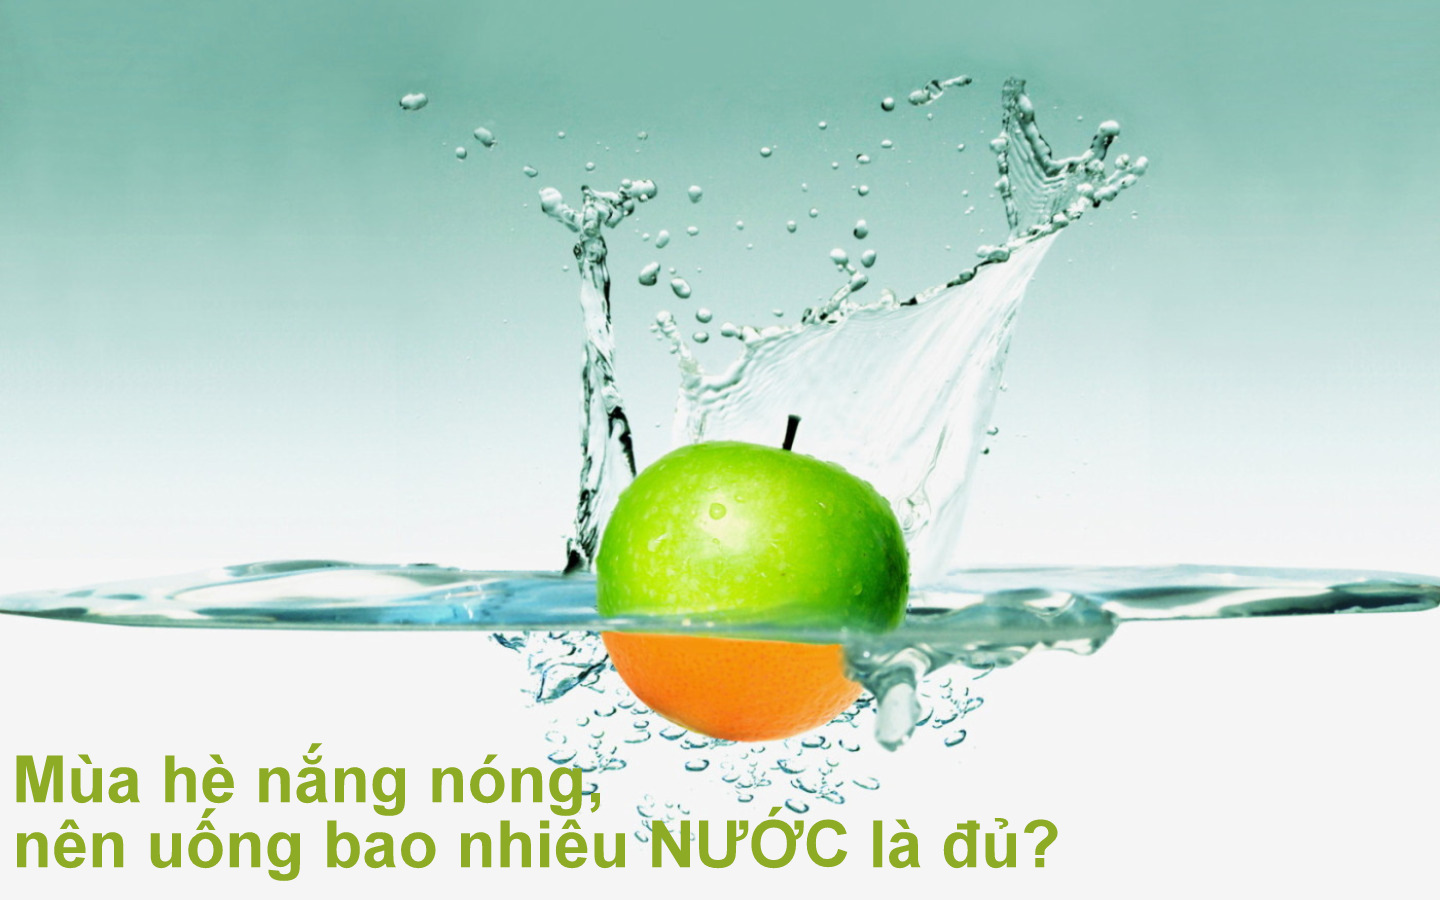 Uong nuoc dung cach